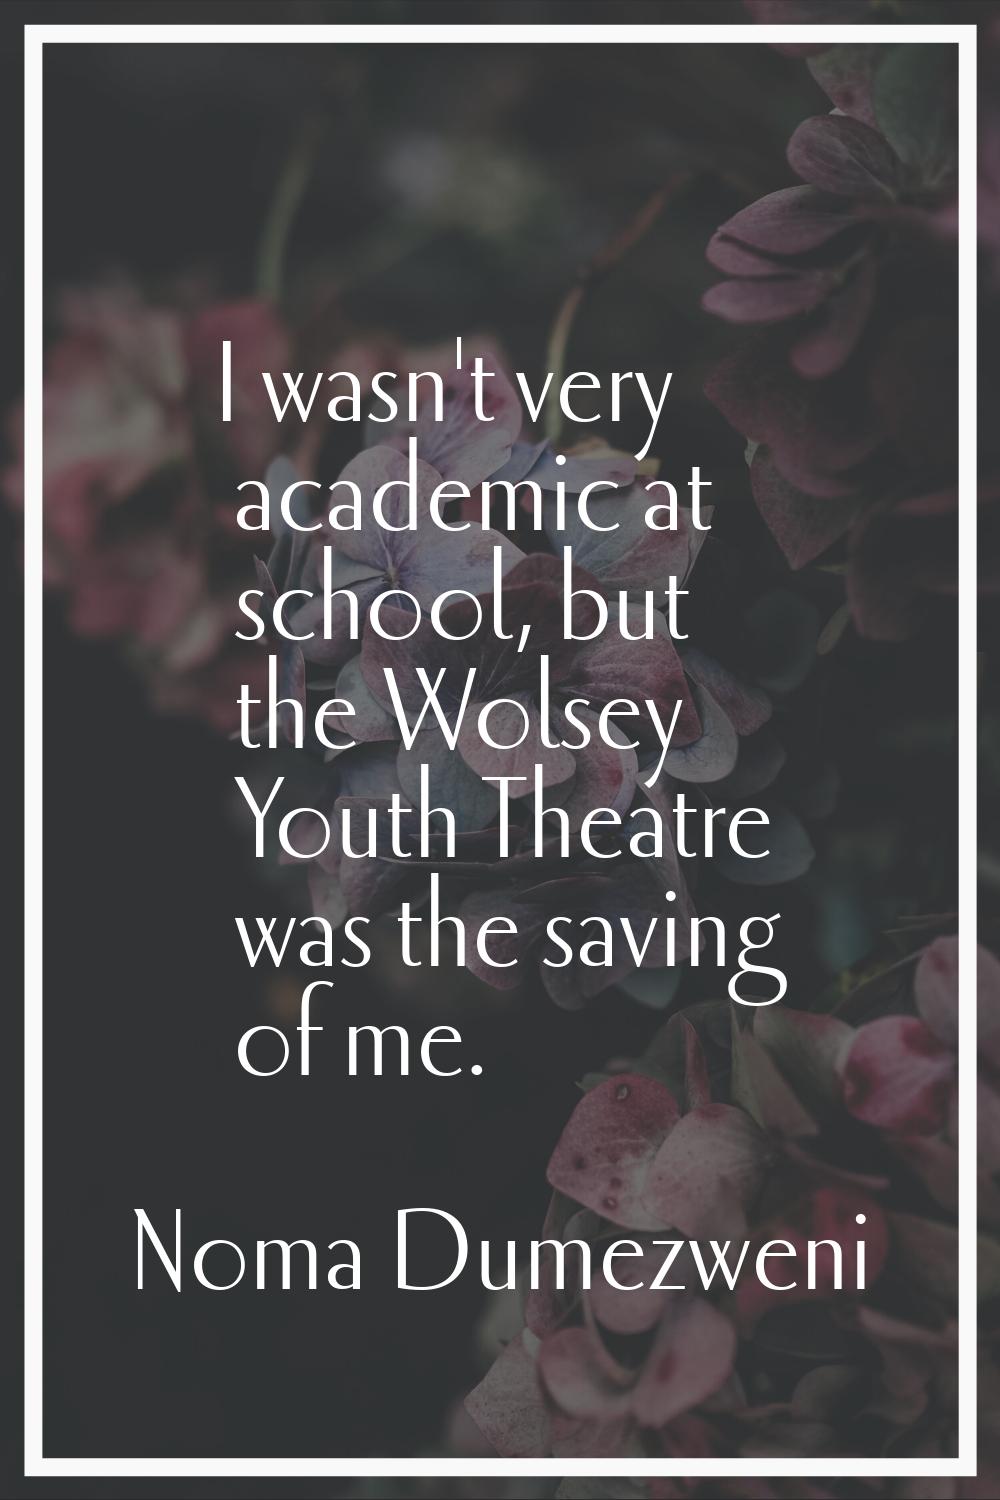 I wasn't very academic at school, but the Wolsey Youth Theatre was the saving of me.